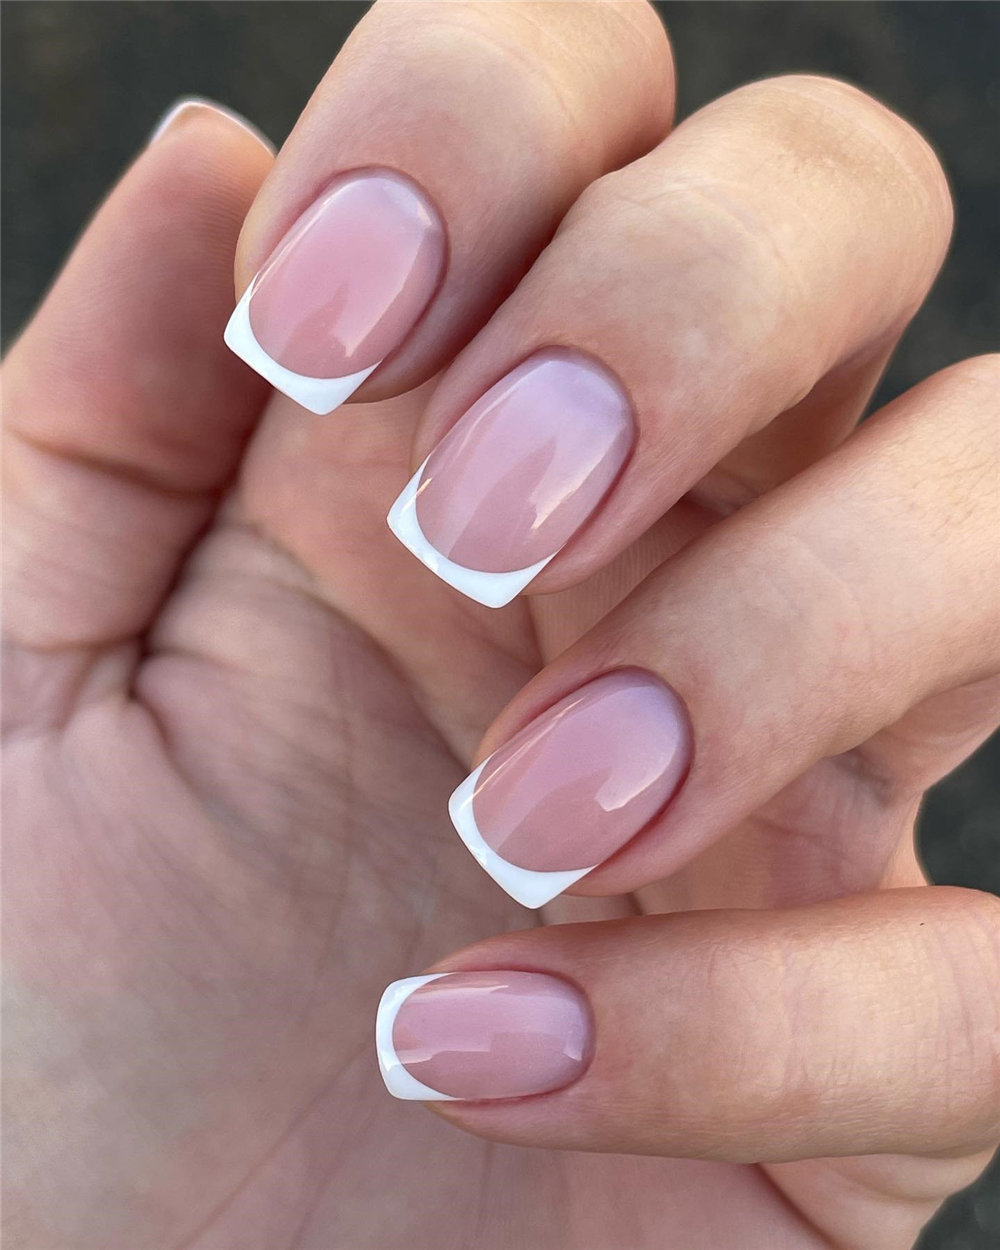 cute and simple Spring nail art ideas and designs, Spring Nails, spring nails acrylic, Simple Spring Nails, short nails, #springnails #nailart #manicure #naildesigns